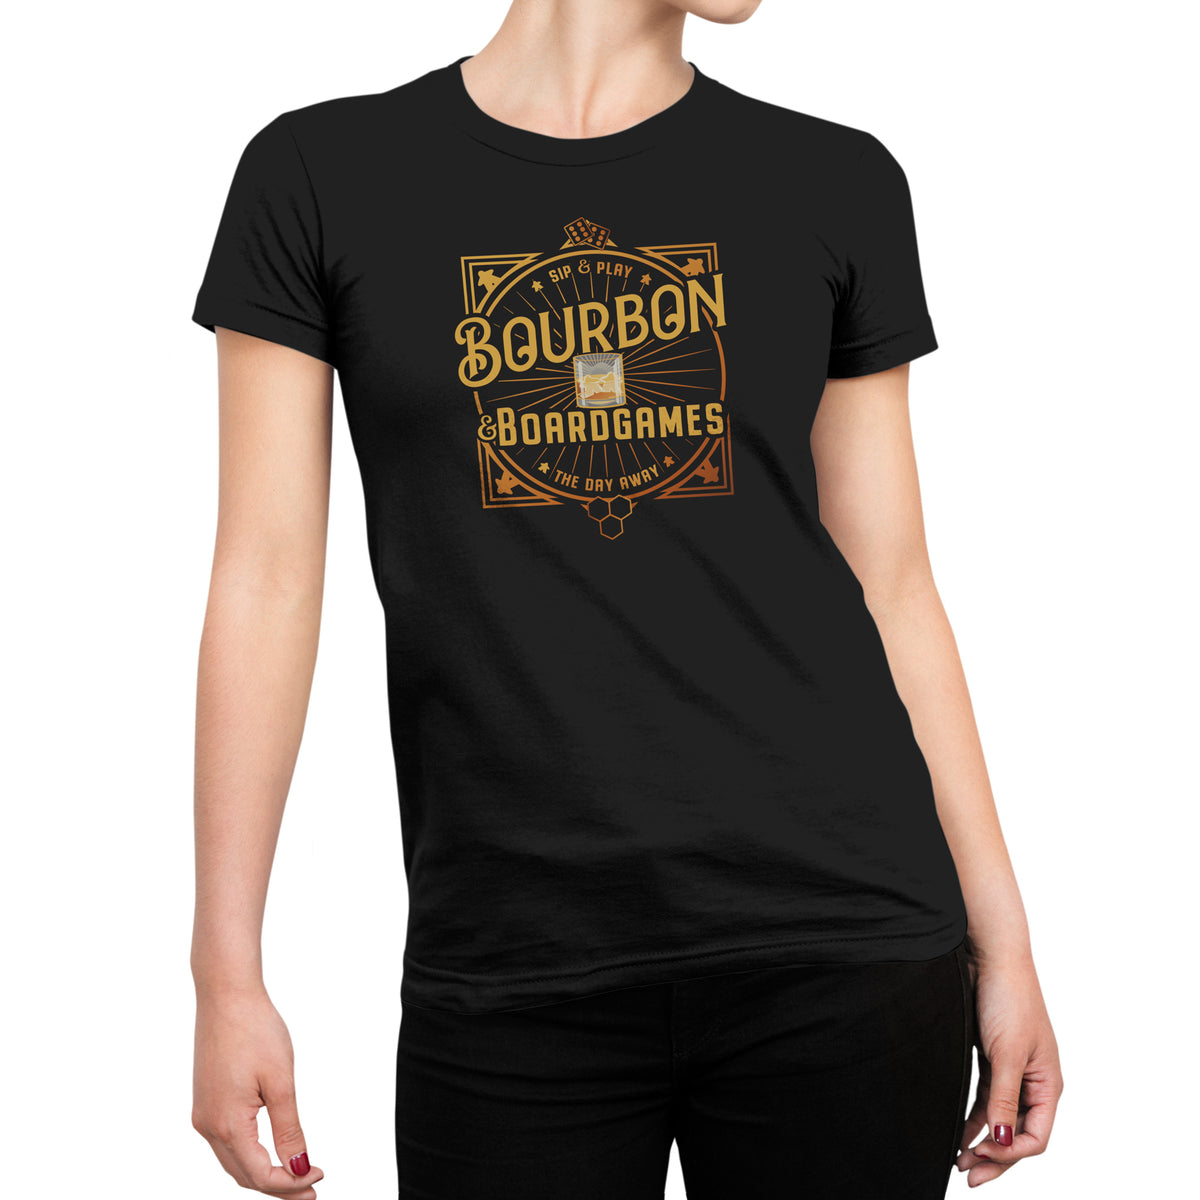 Bourbon and Boardgames T-Shirt